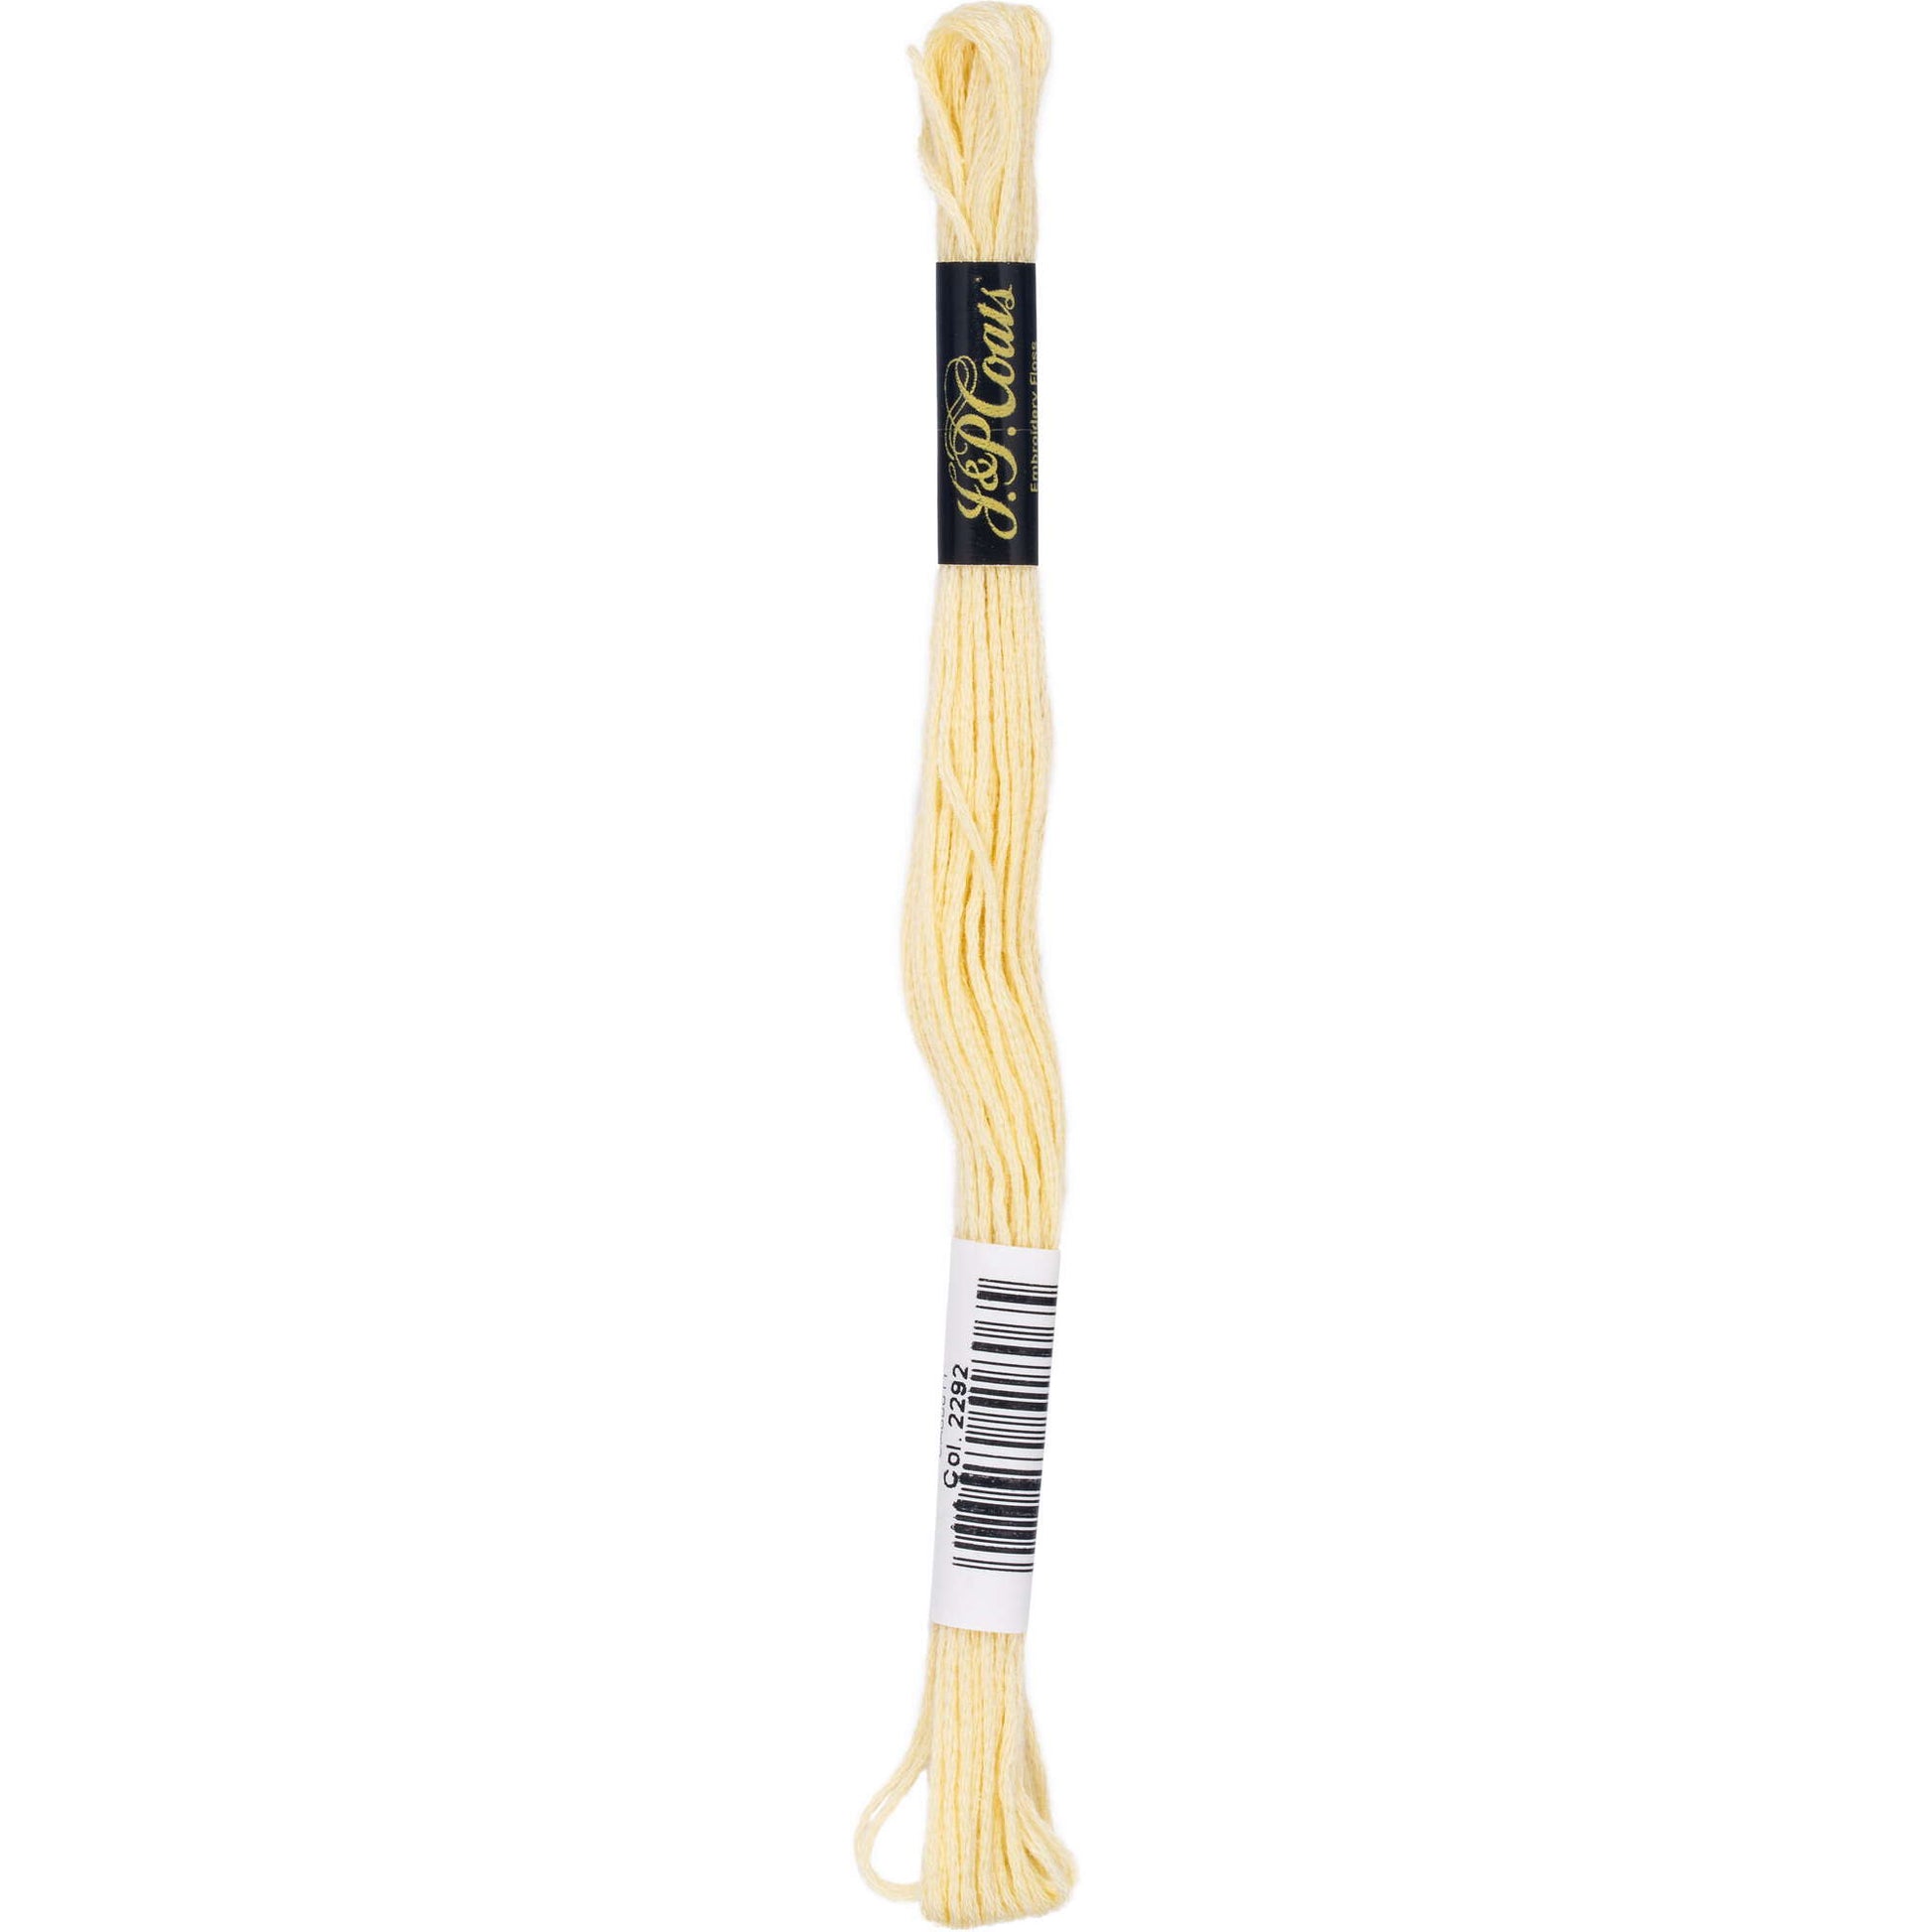 Coats & Clark 6-Strand Embroidery Floss Value Pack 36/Pkg Black and White